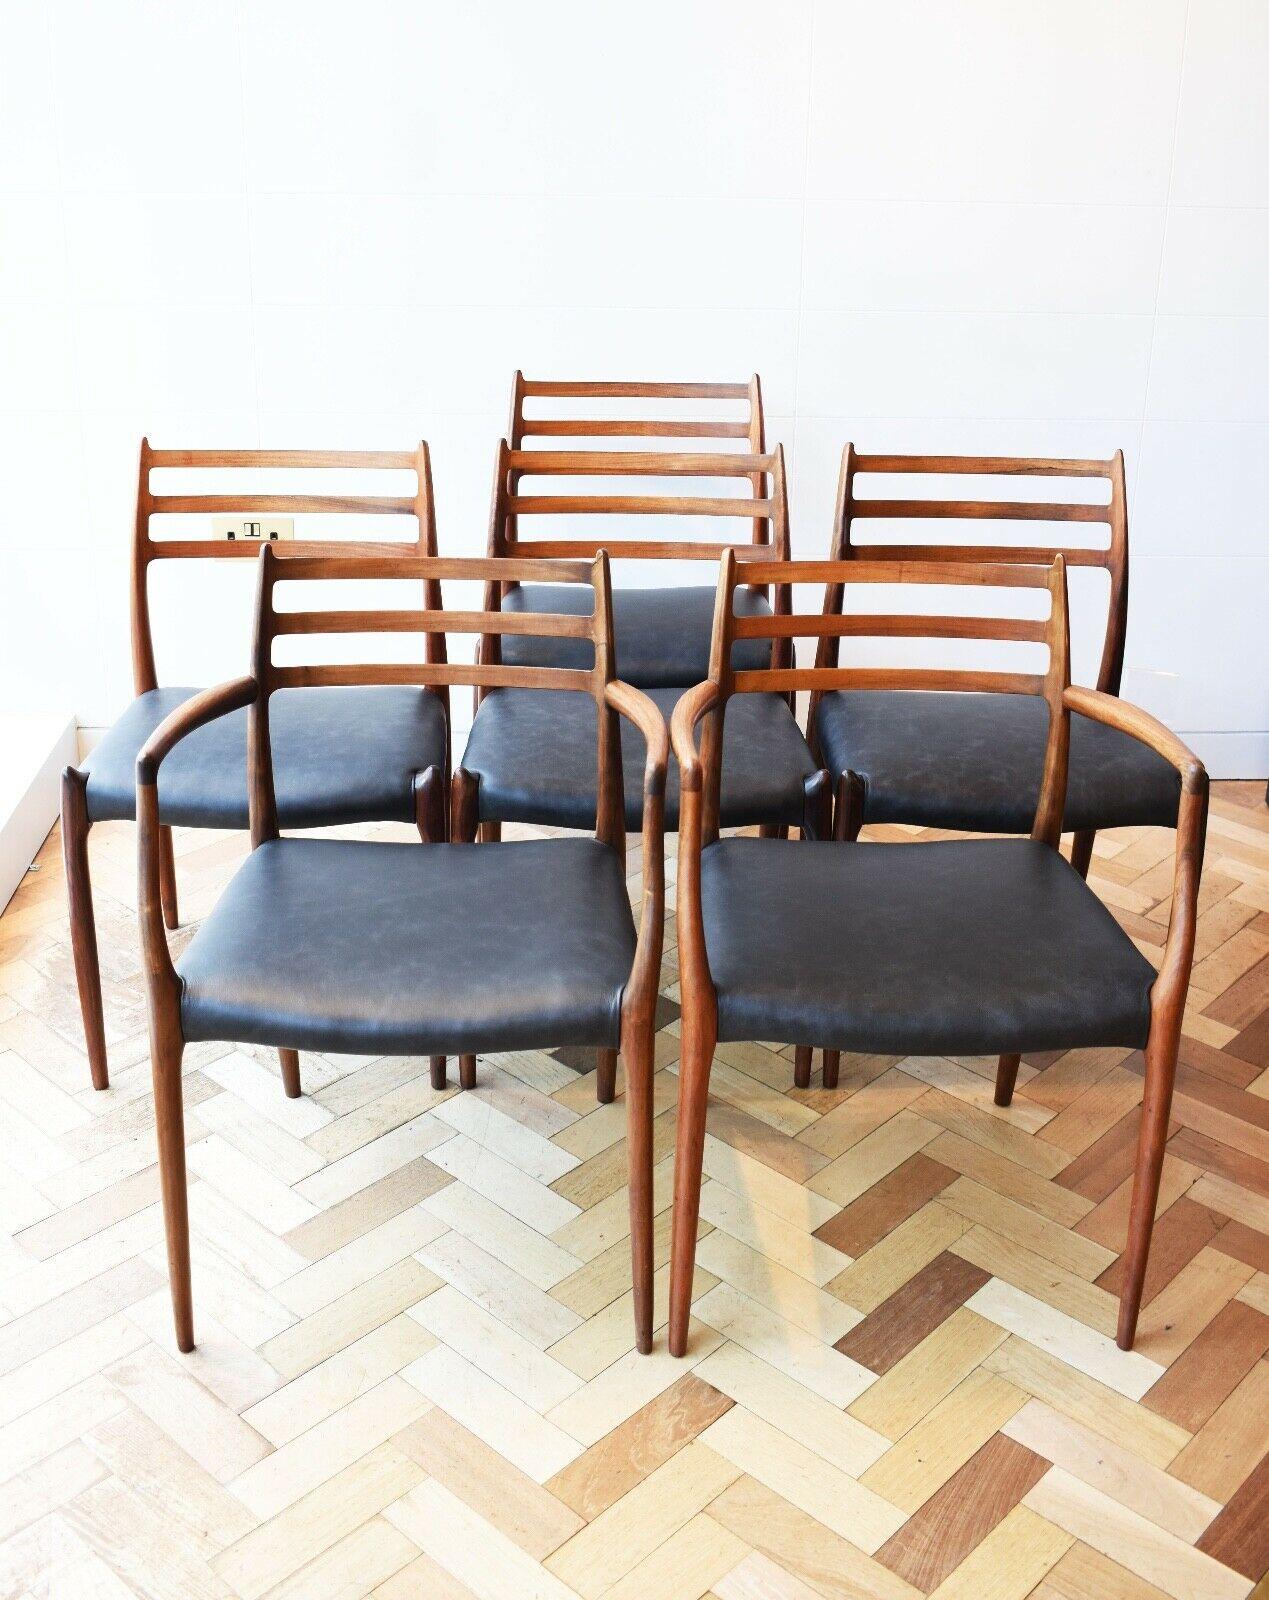 A stunning set of 6 Danish dining chairs with black leather seats and Rosewood frames, Model no. 78s. Circa, 1950s. 

These elegant dining chairs were designed by Niels Otto Moller for the Danish manufacturer J.L. Moller.

This super stylish &